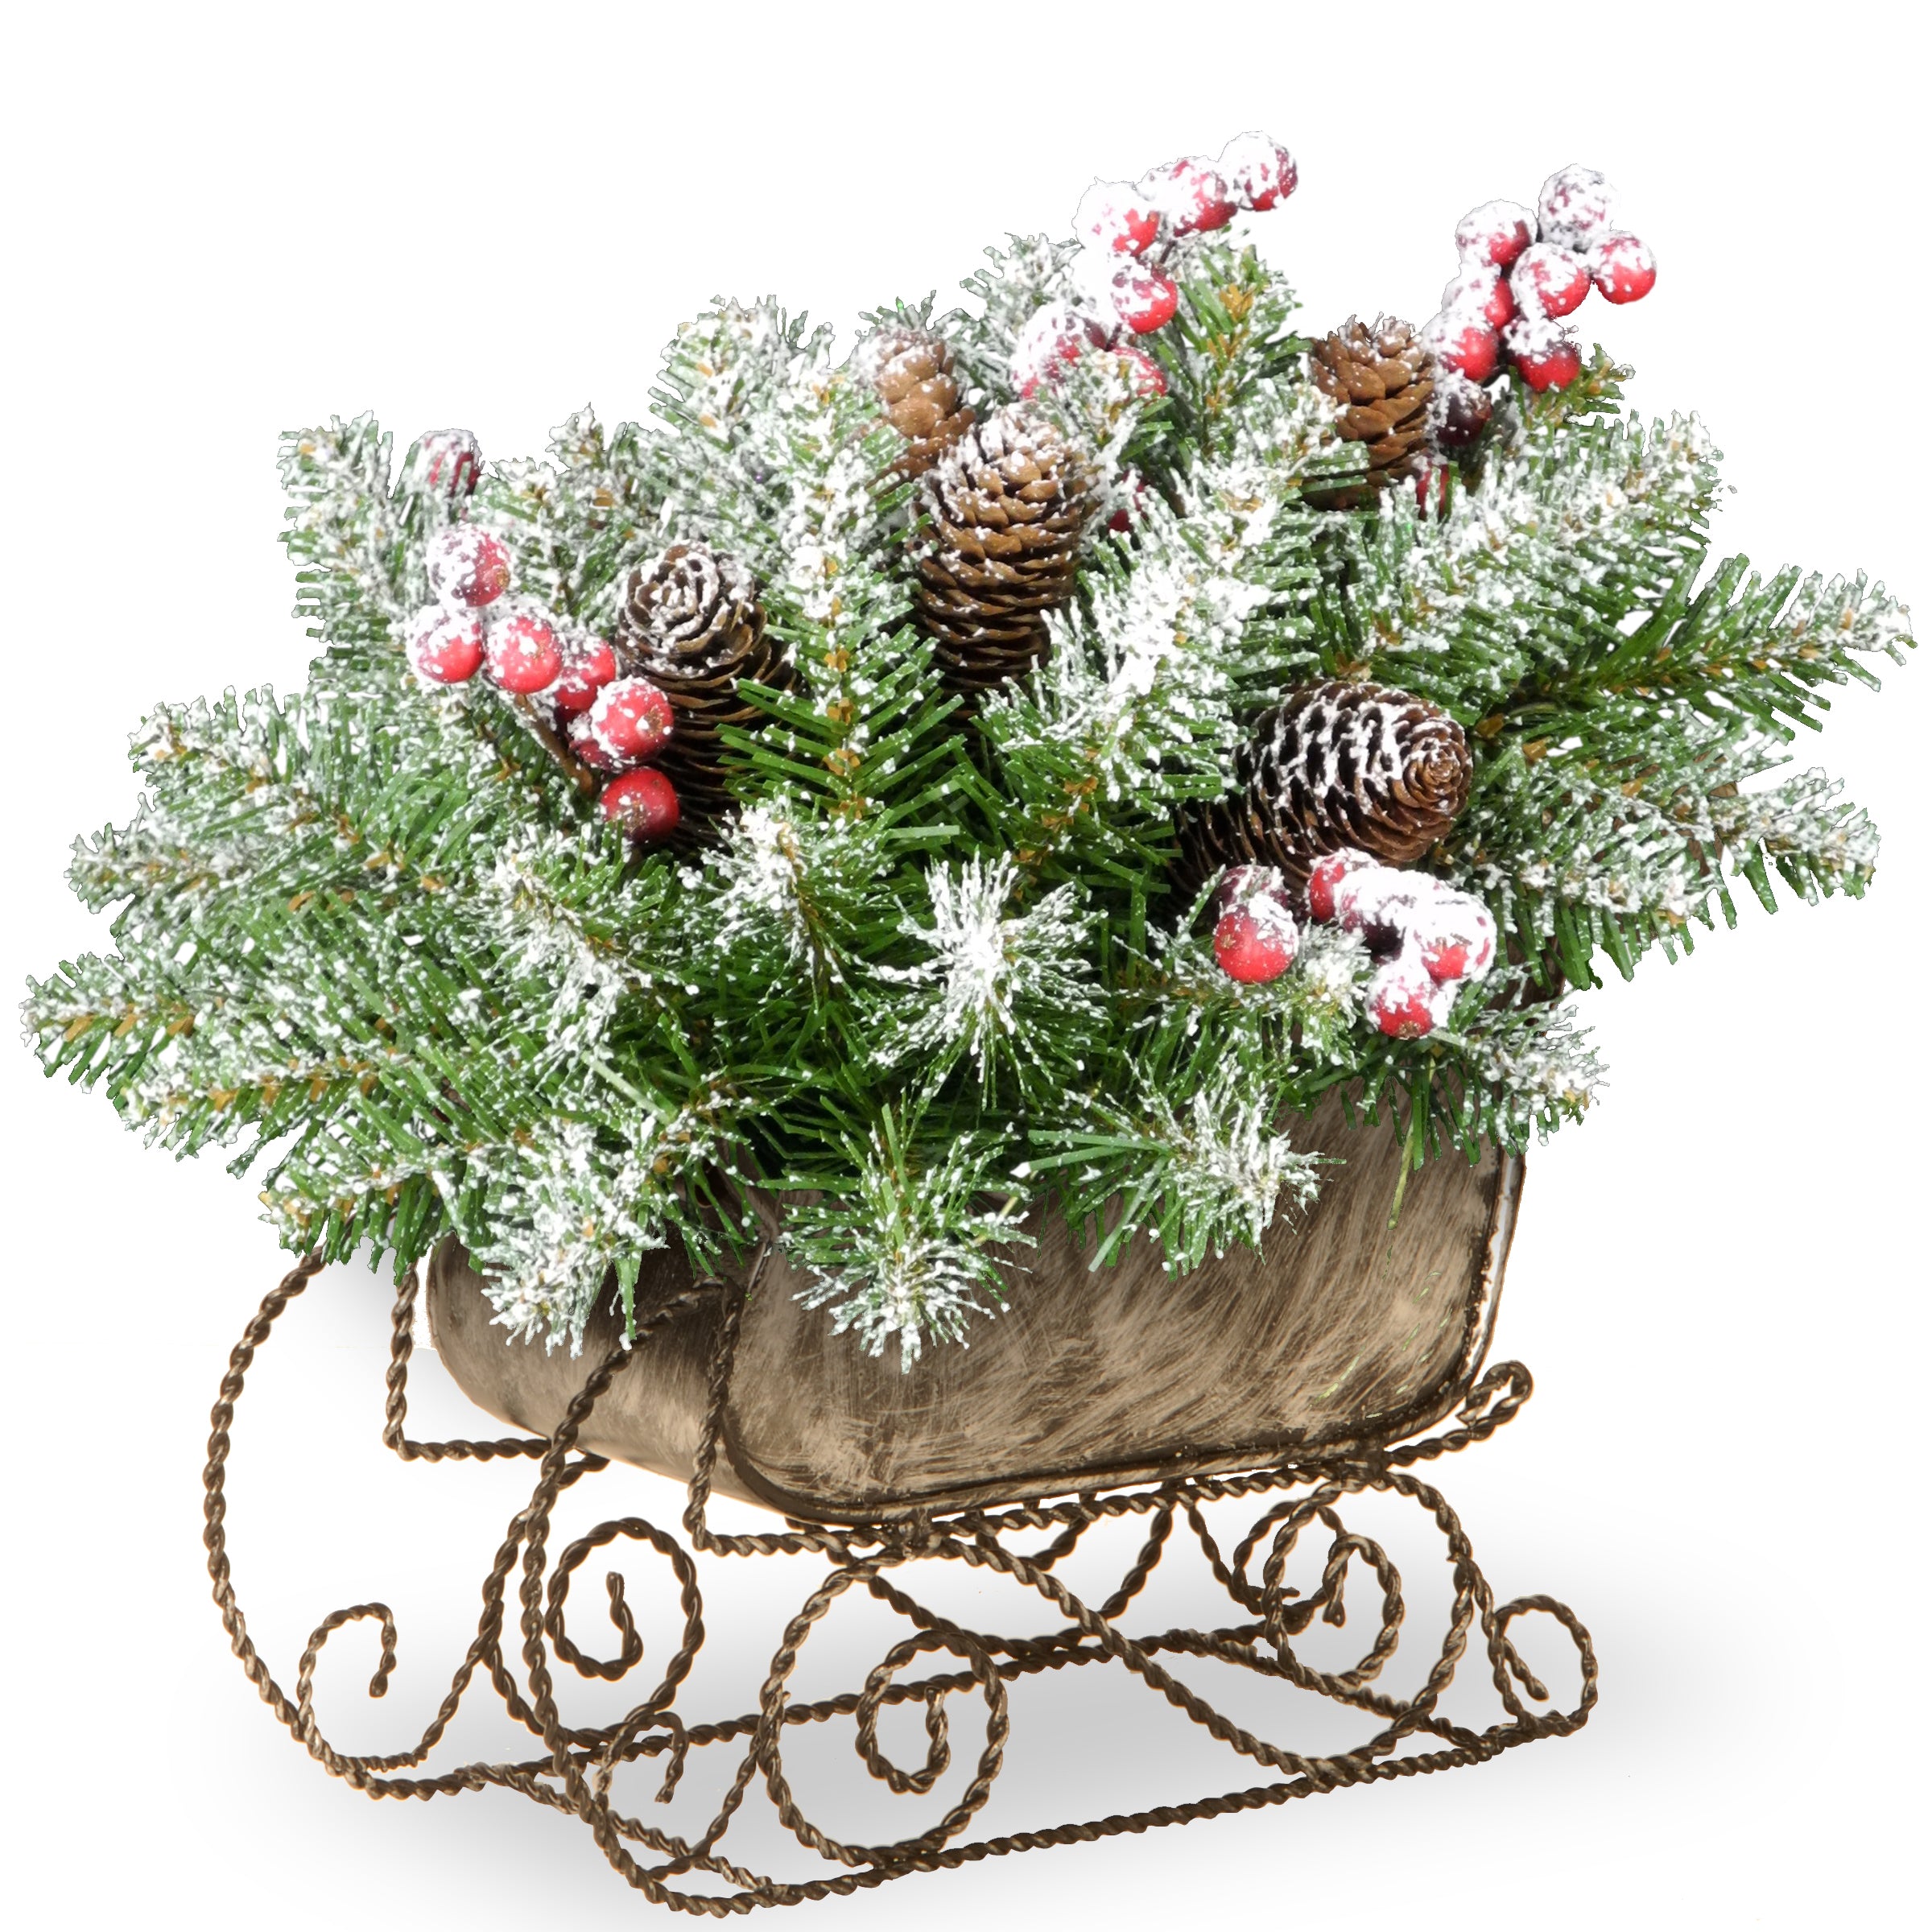 National Tree Duf3-800-10-1 10" Dunhill Fir Sleigh With Snow, Berries And Cones